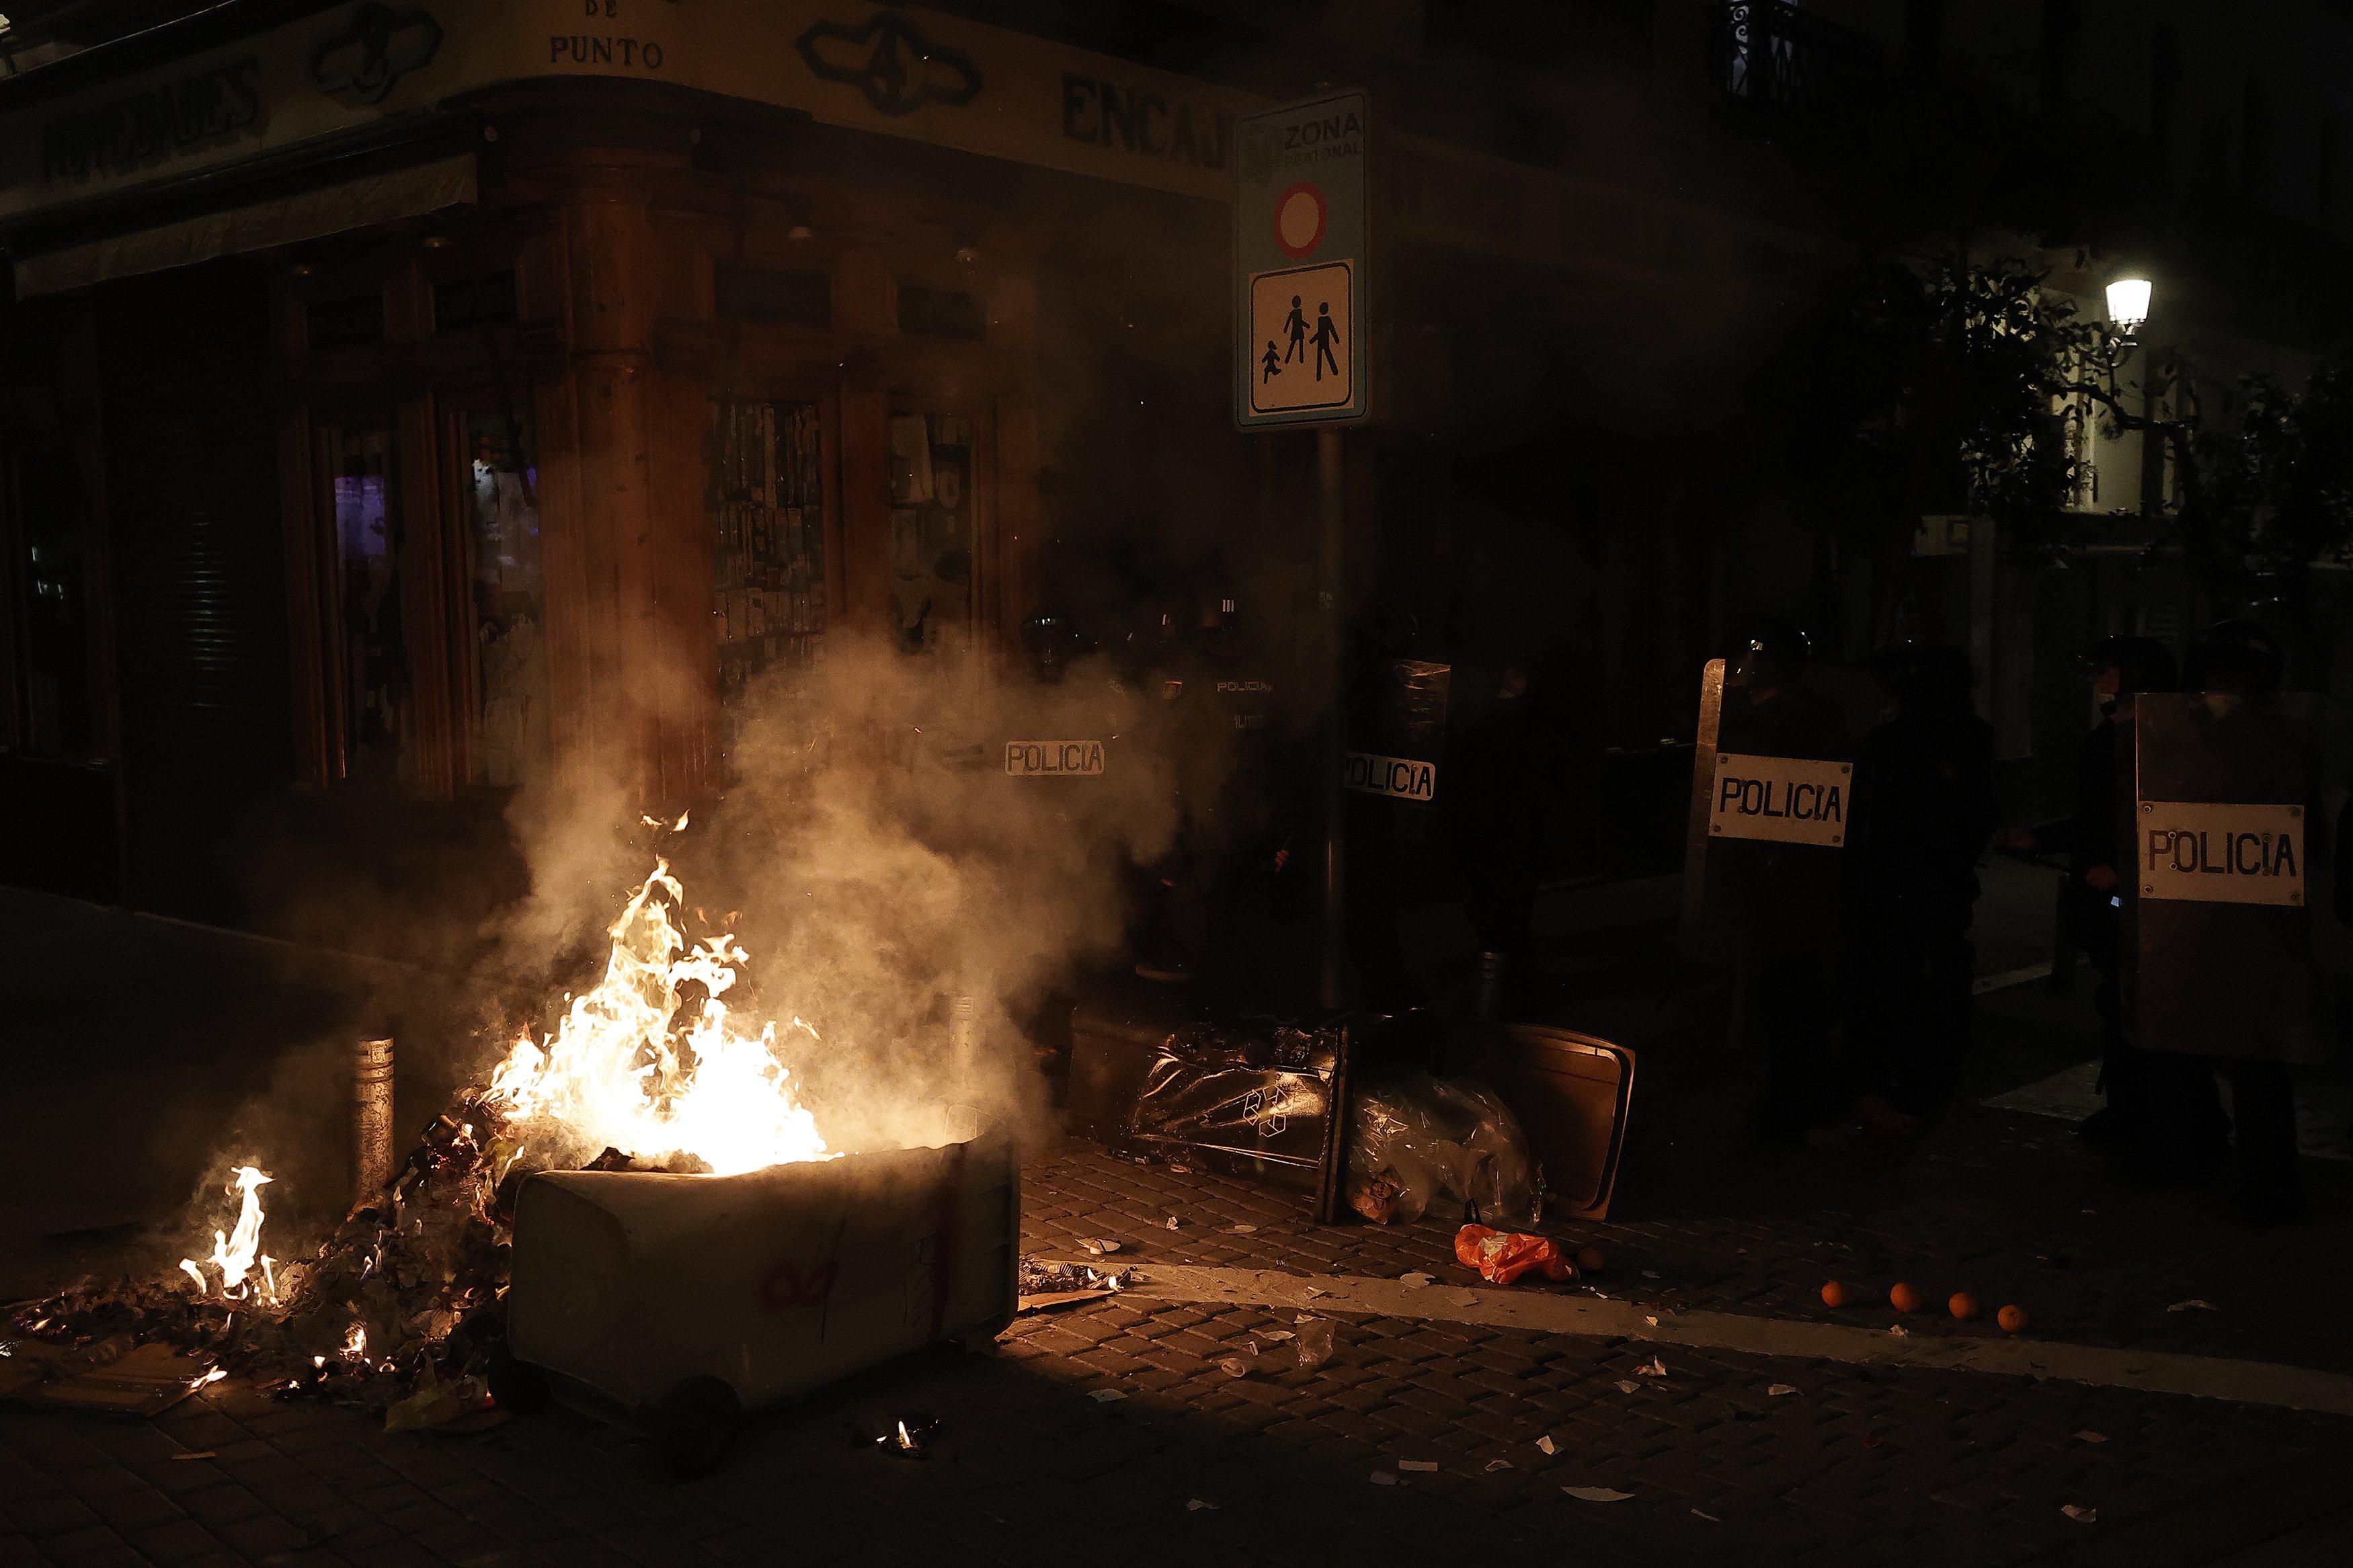 Spain sees second night of rioting after rappers arrest